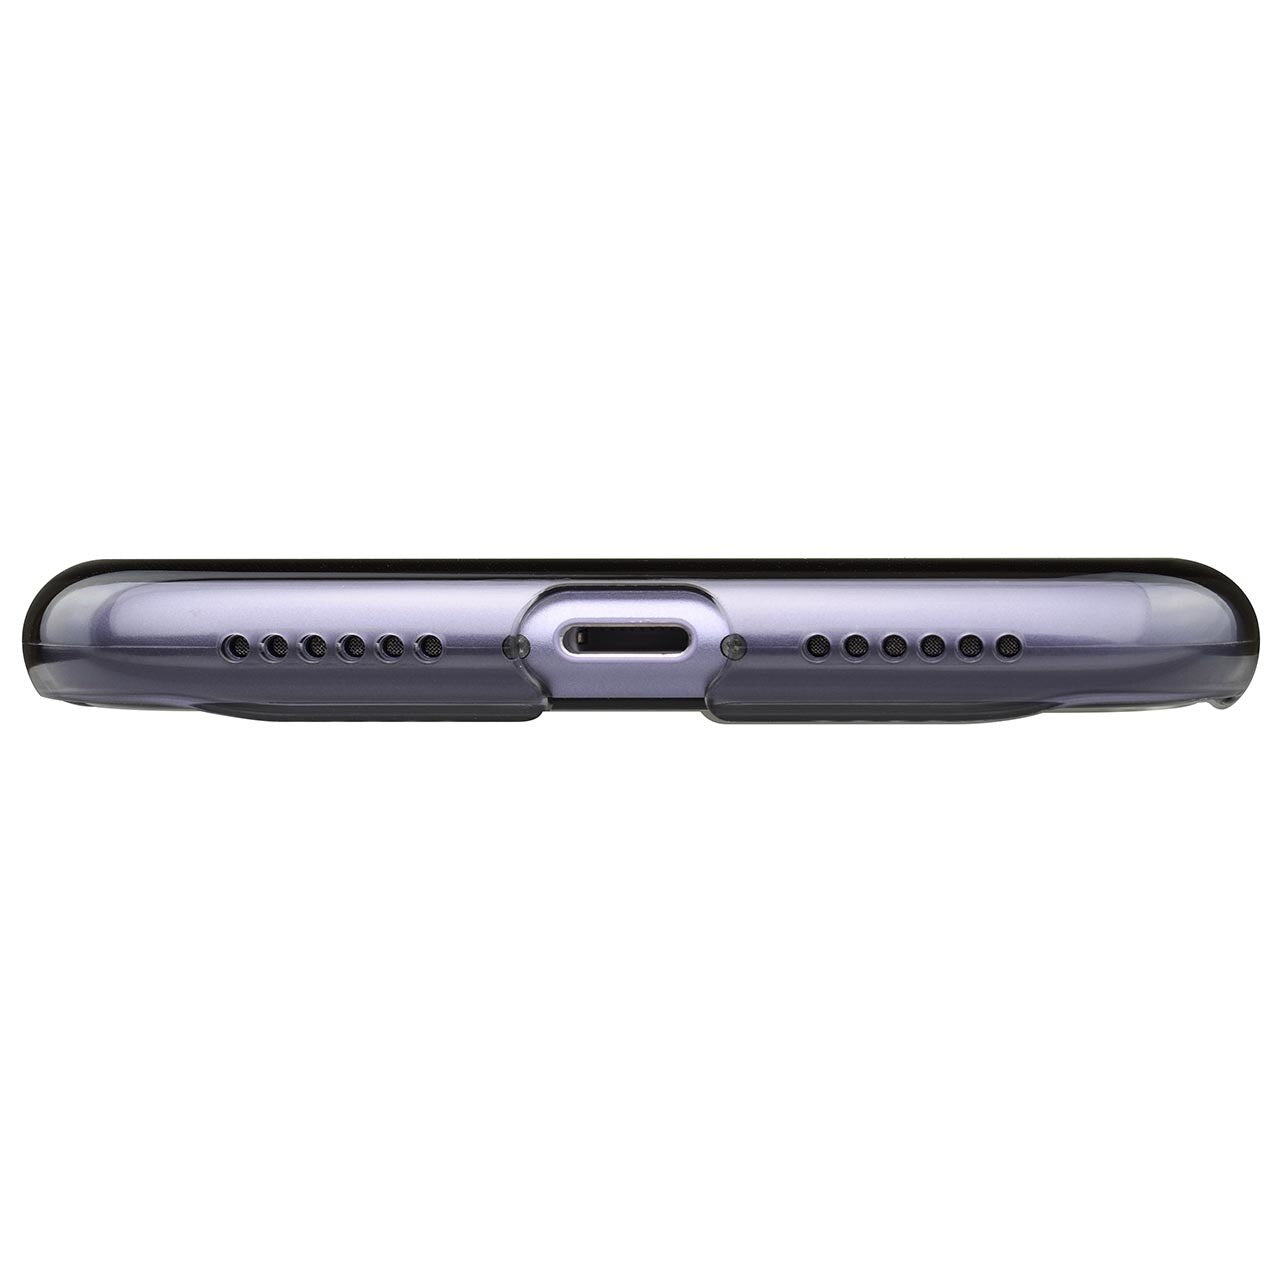 Air Jacket for iPhone 11 - Clear Black